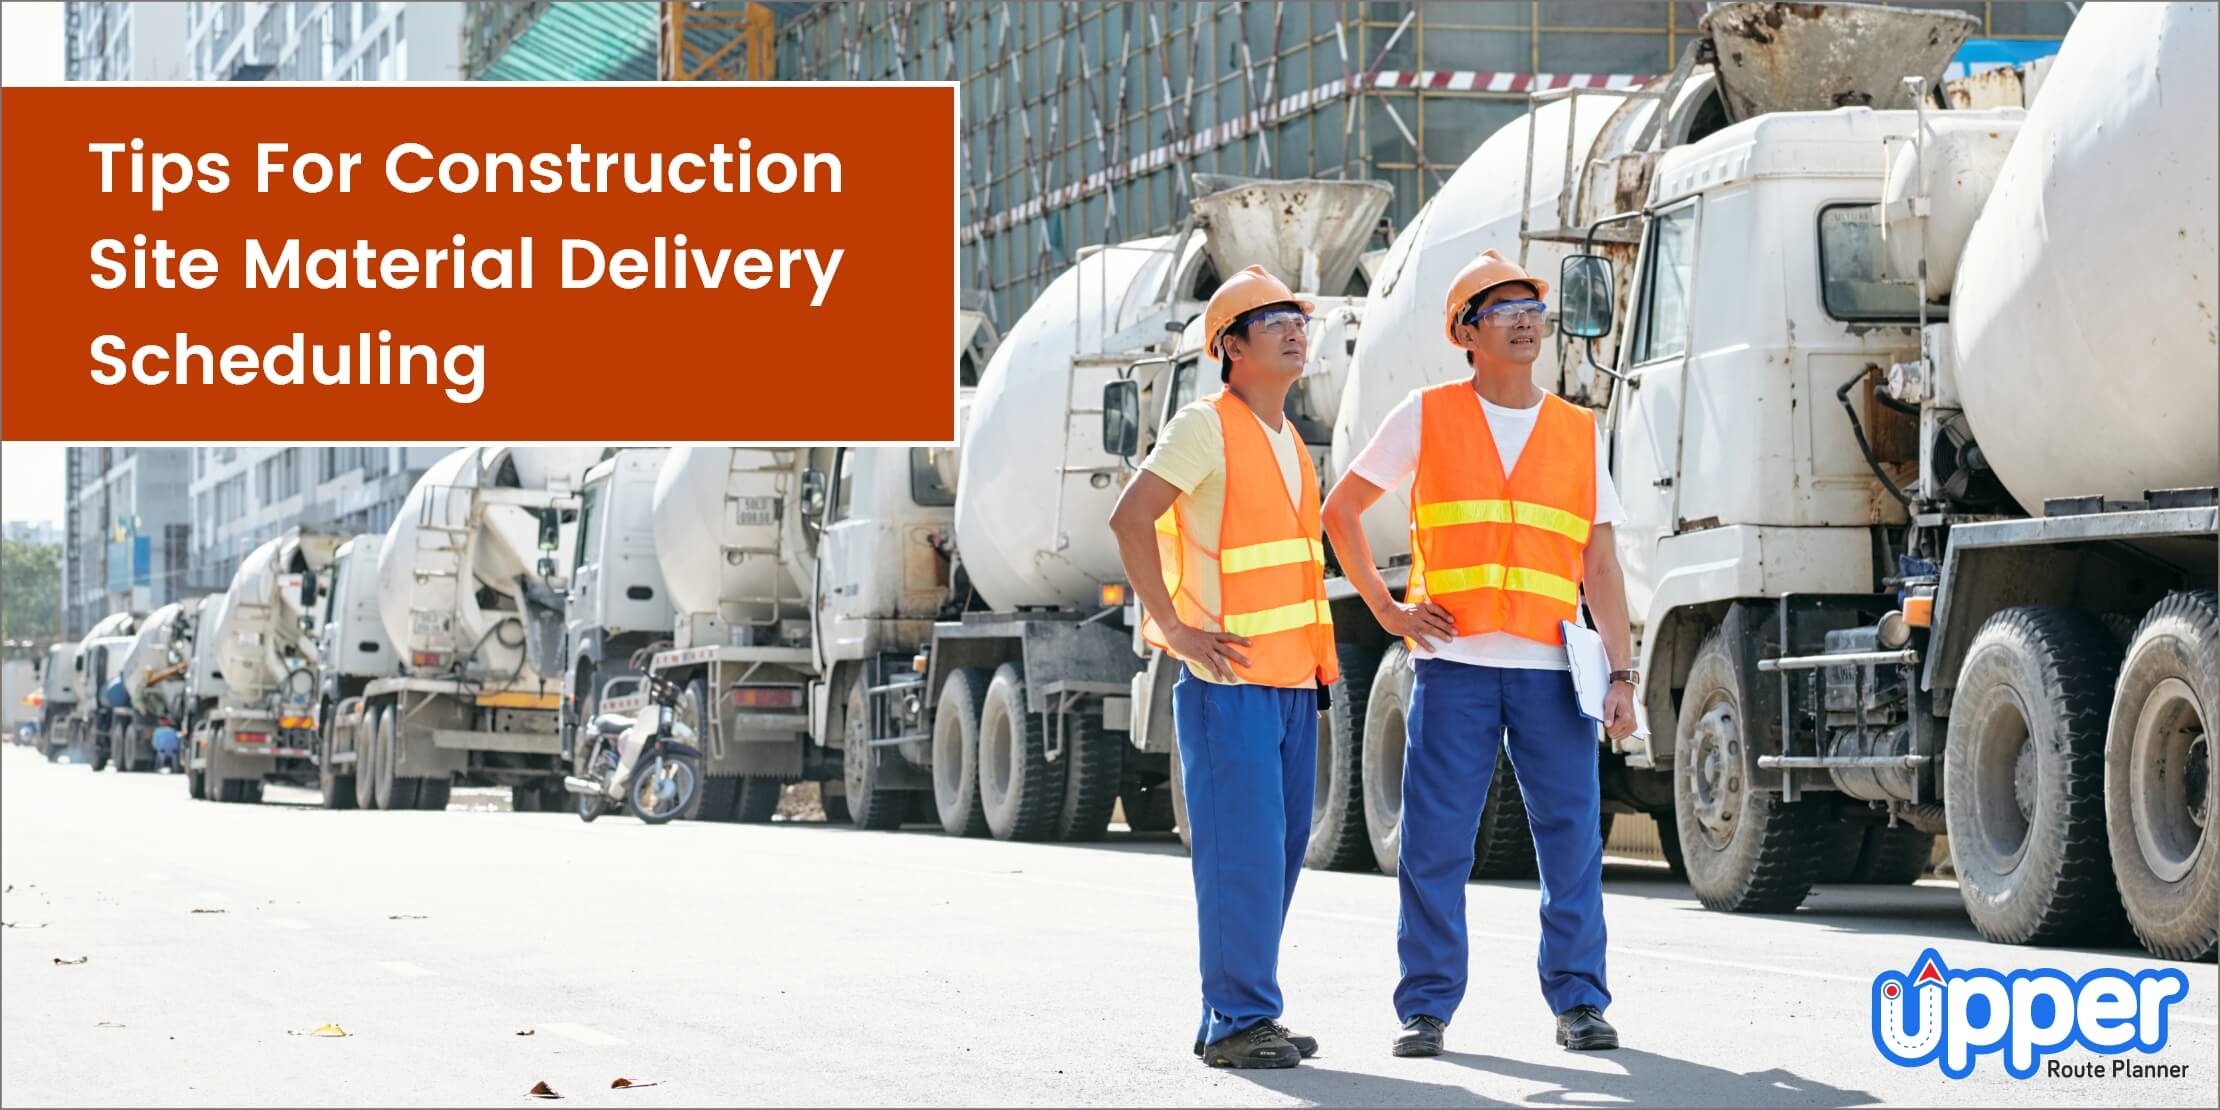 Better construction site material delivery scheduling tips